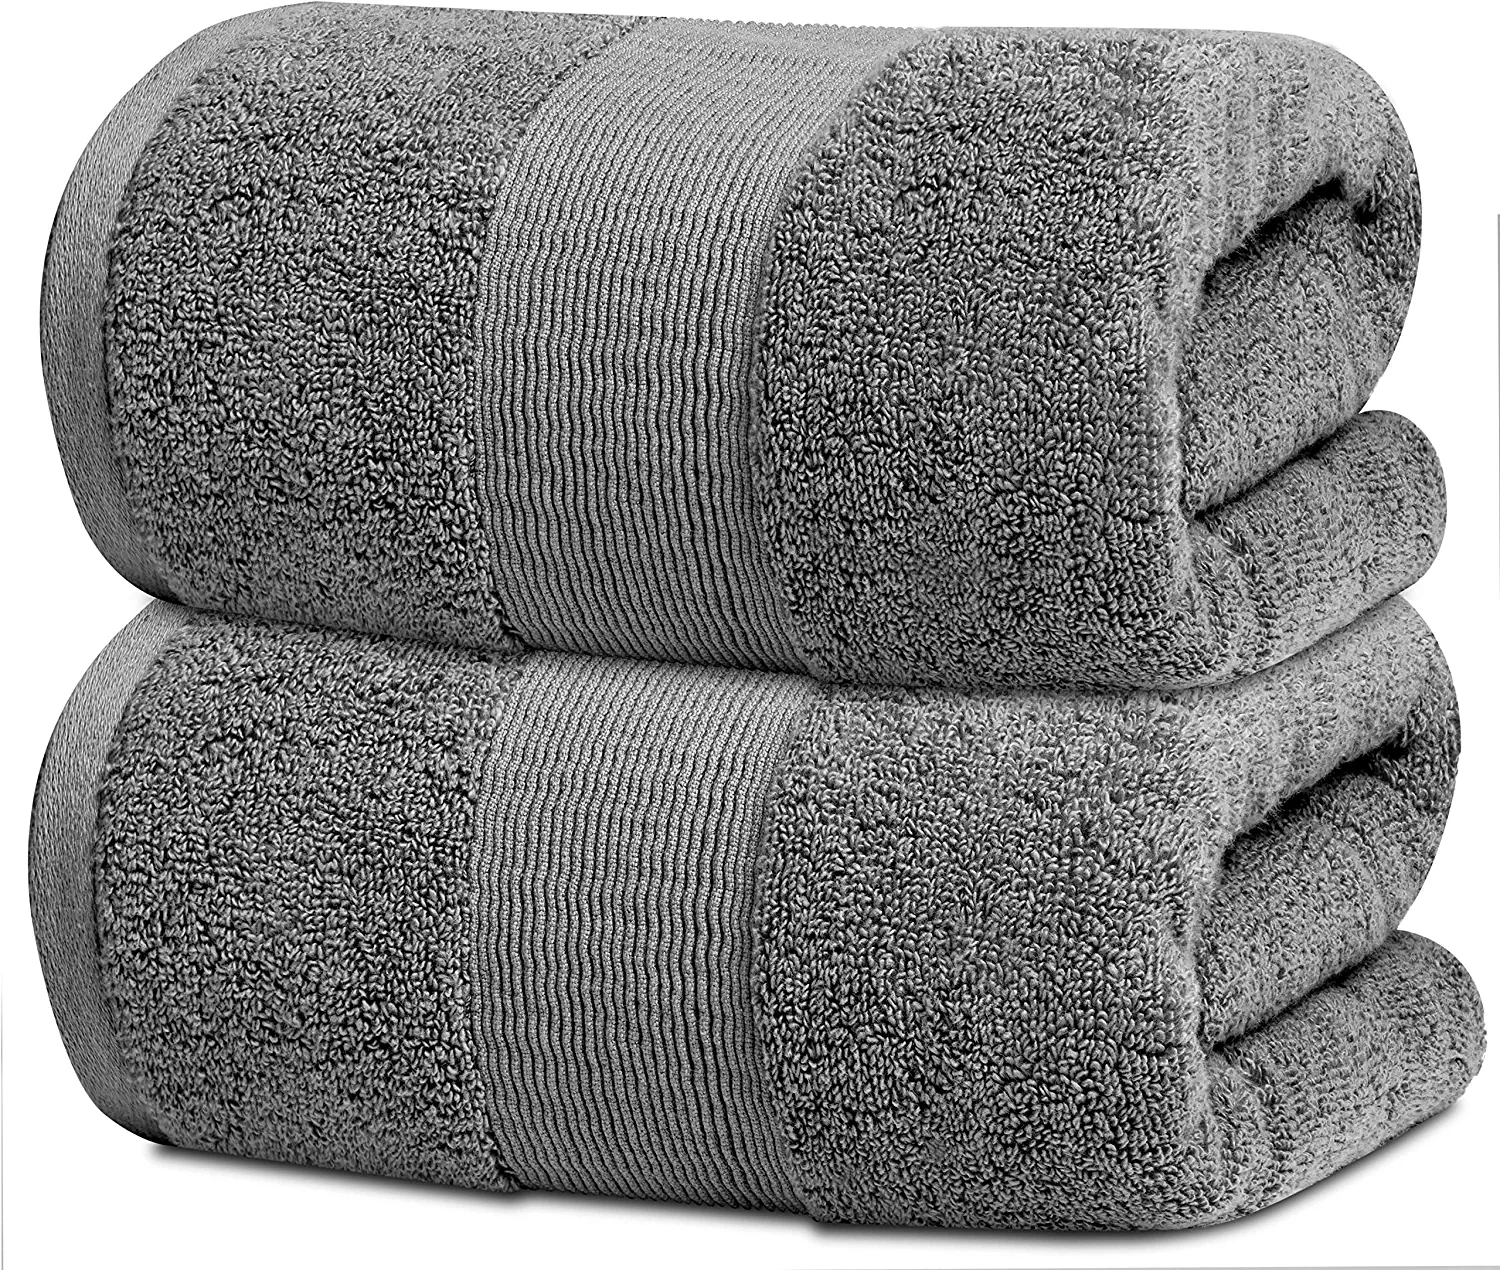 Smuge 2 Pack Oversized Bath Sheet Towels (35 x 70 in,Cream) 700 GSM Ultra  Soft Large Bath Towel Set Thick Cozy Quick Dry Bathroom Towels Hotel  Luxurious Towels 